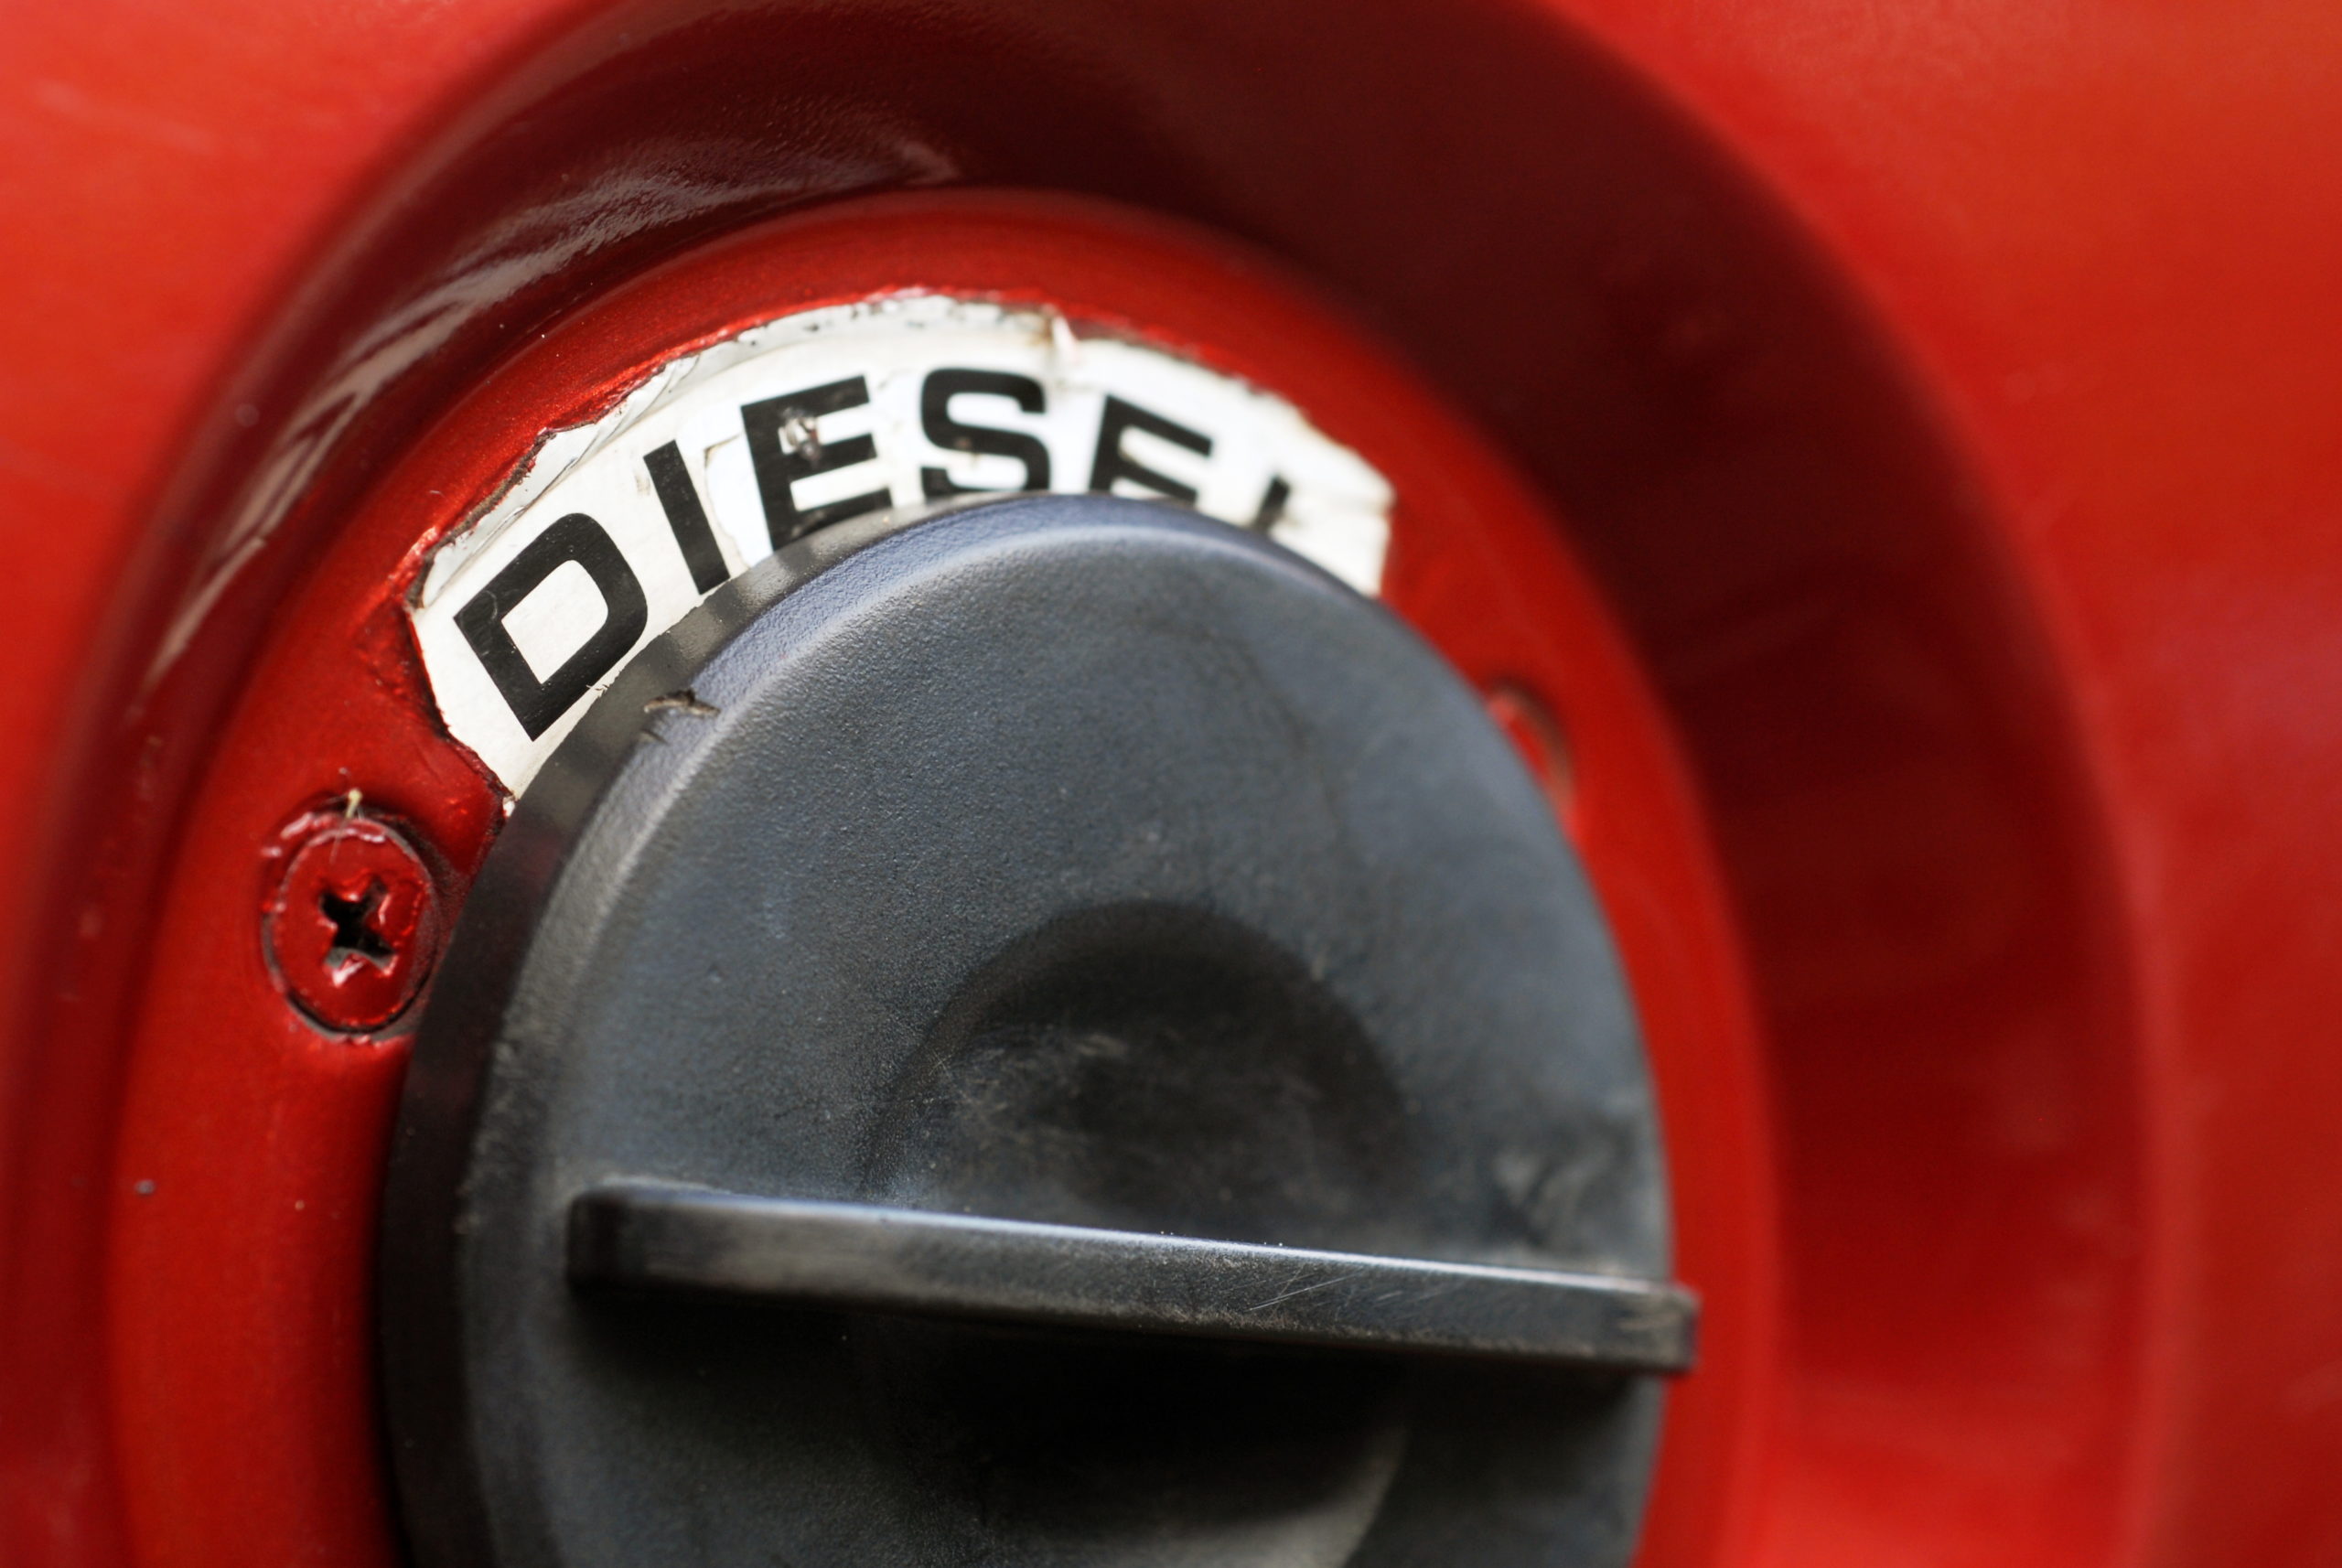 RMAS calls for rethink on ‘ill-conceived red diesel ban’ - letsrecycle.com